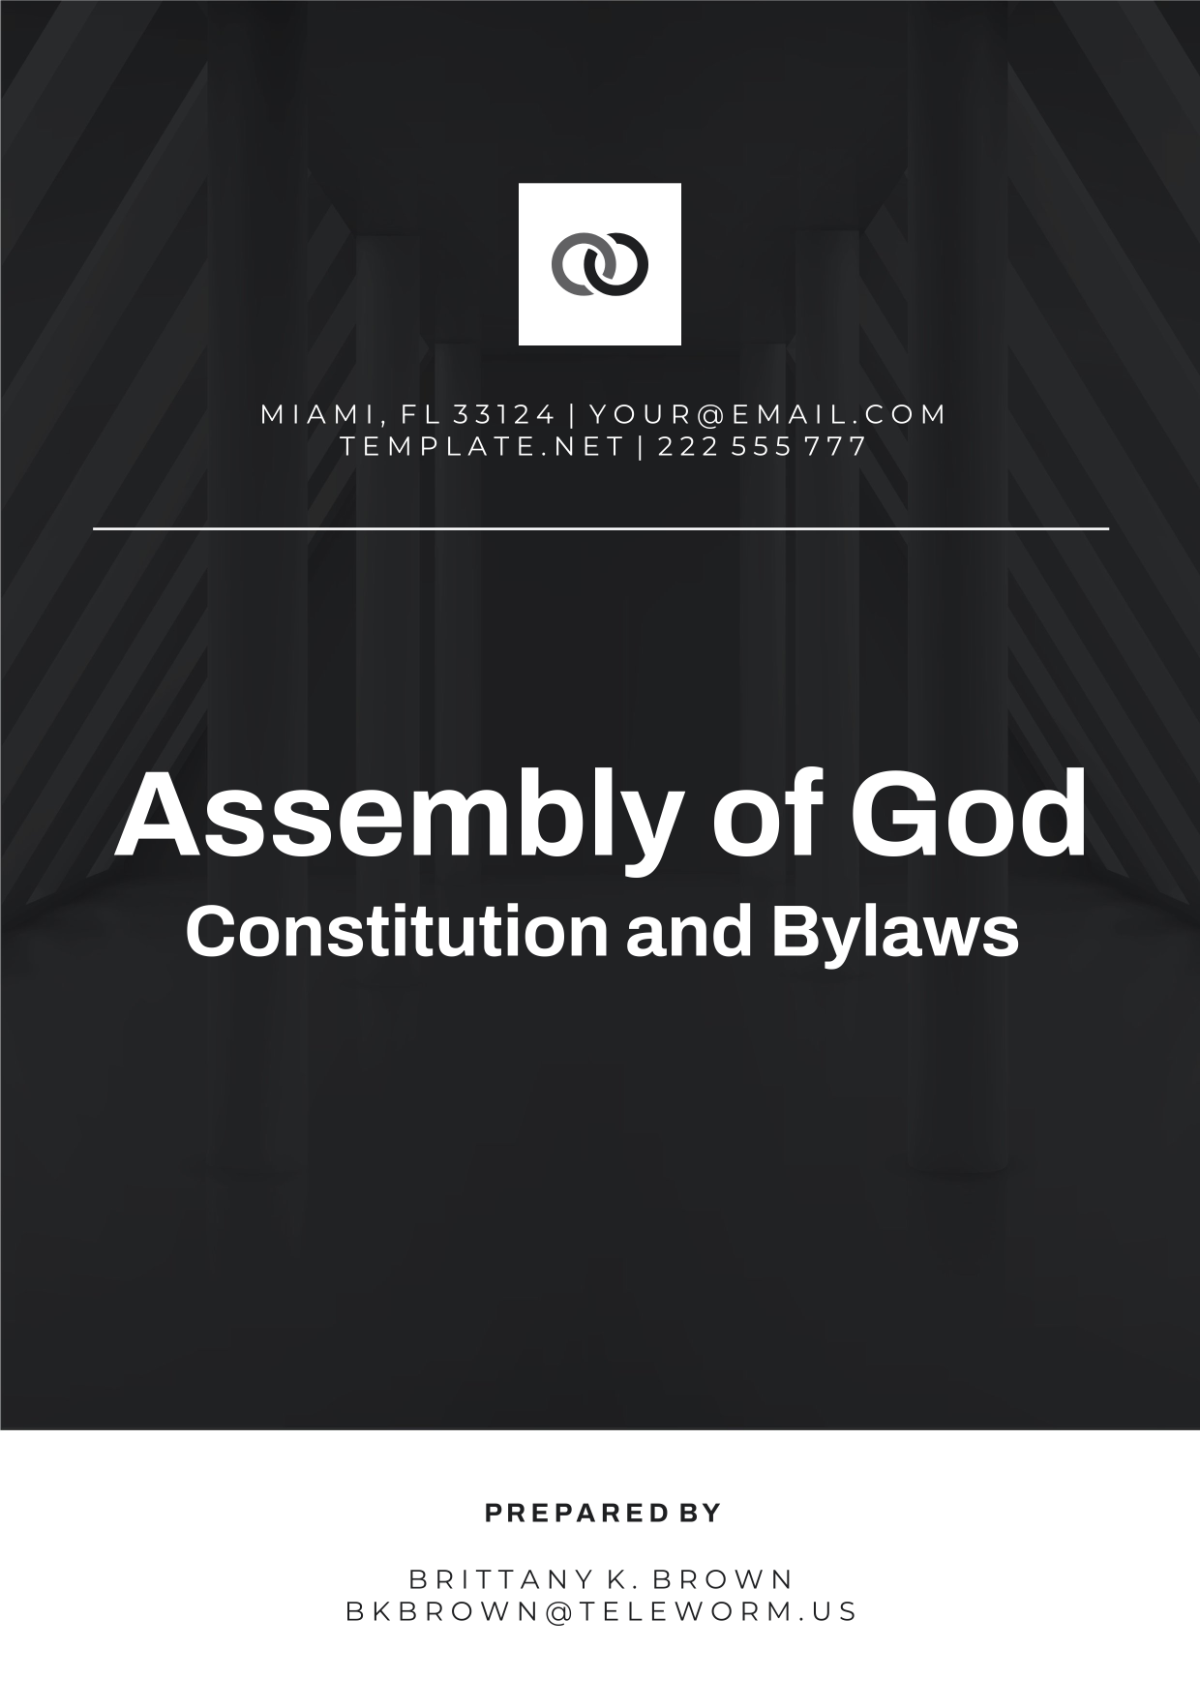 Assembly Of God Constitution And Bylaws Template